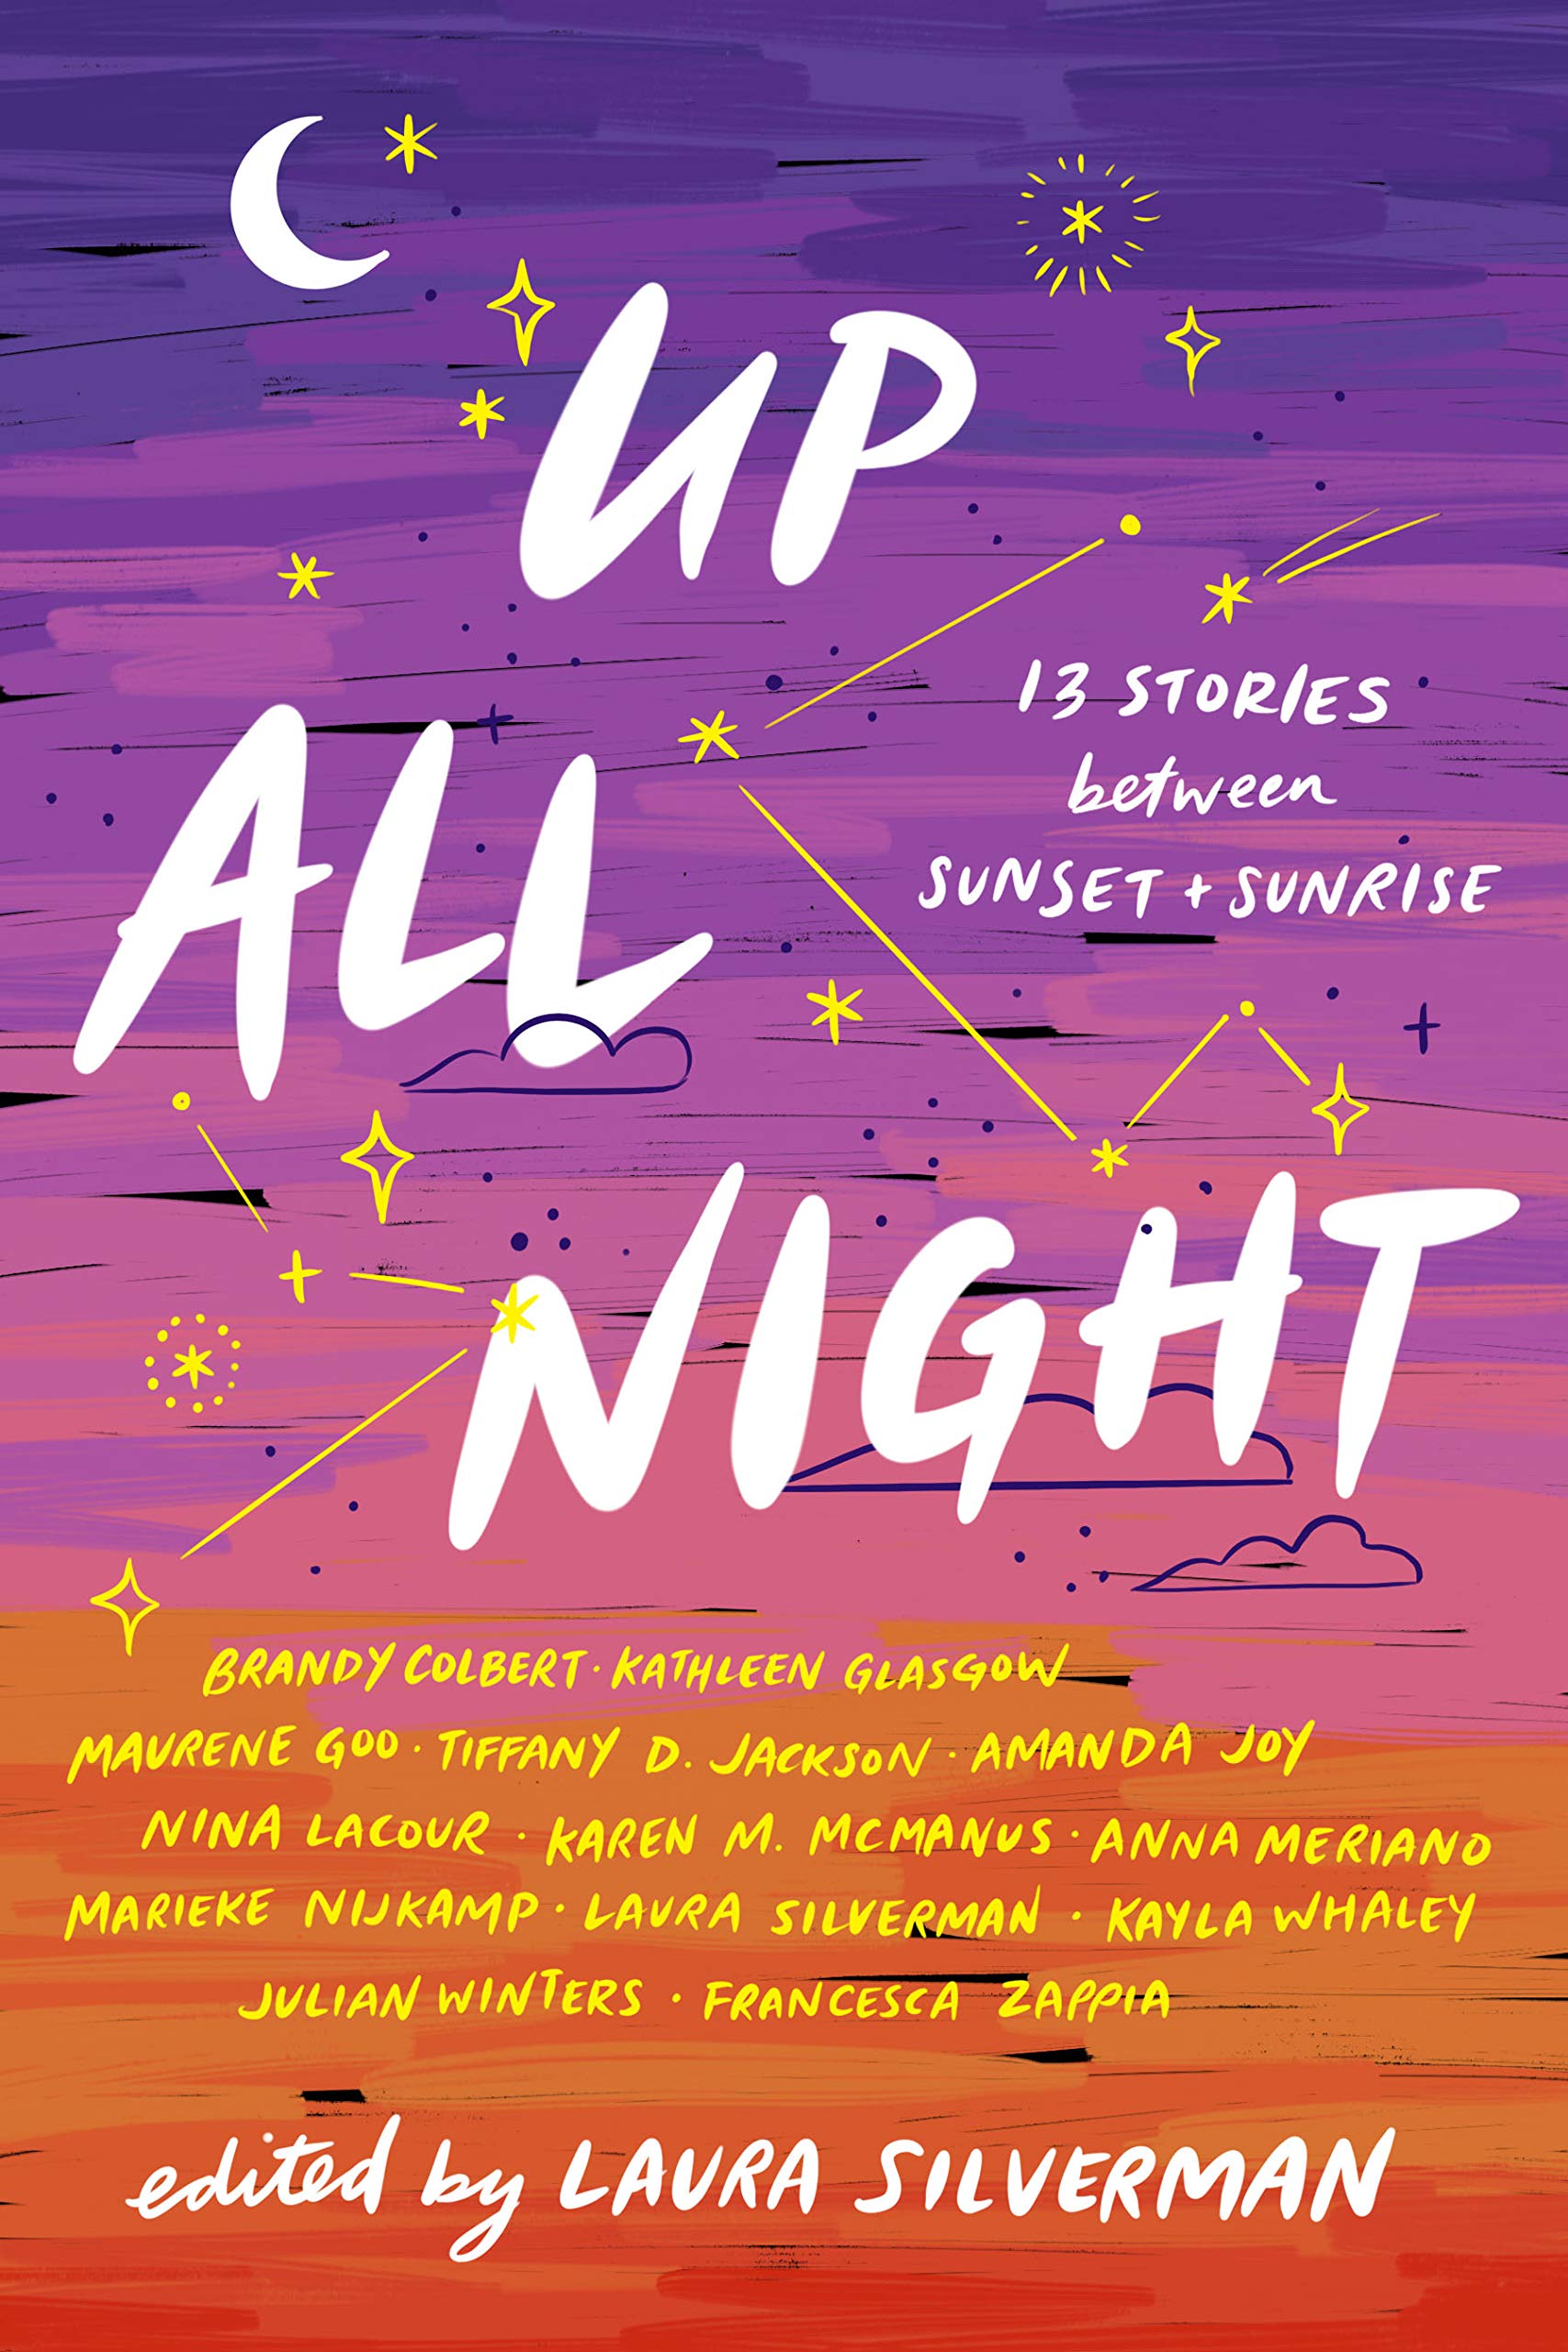 Up All Night: 13 Stories Between Sunset and Sunrise